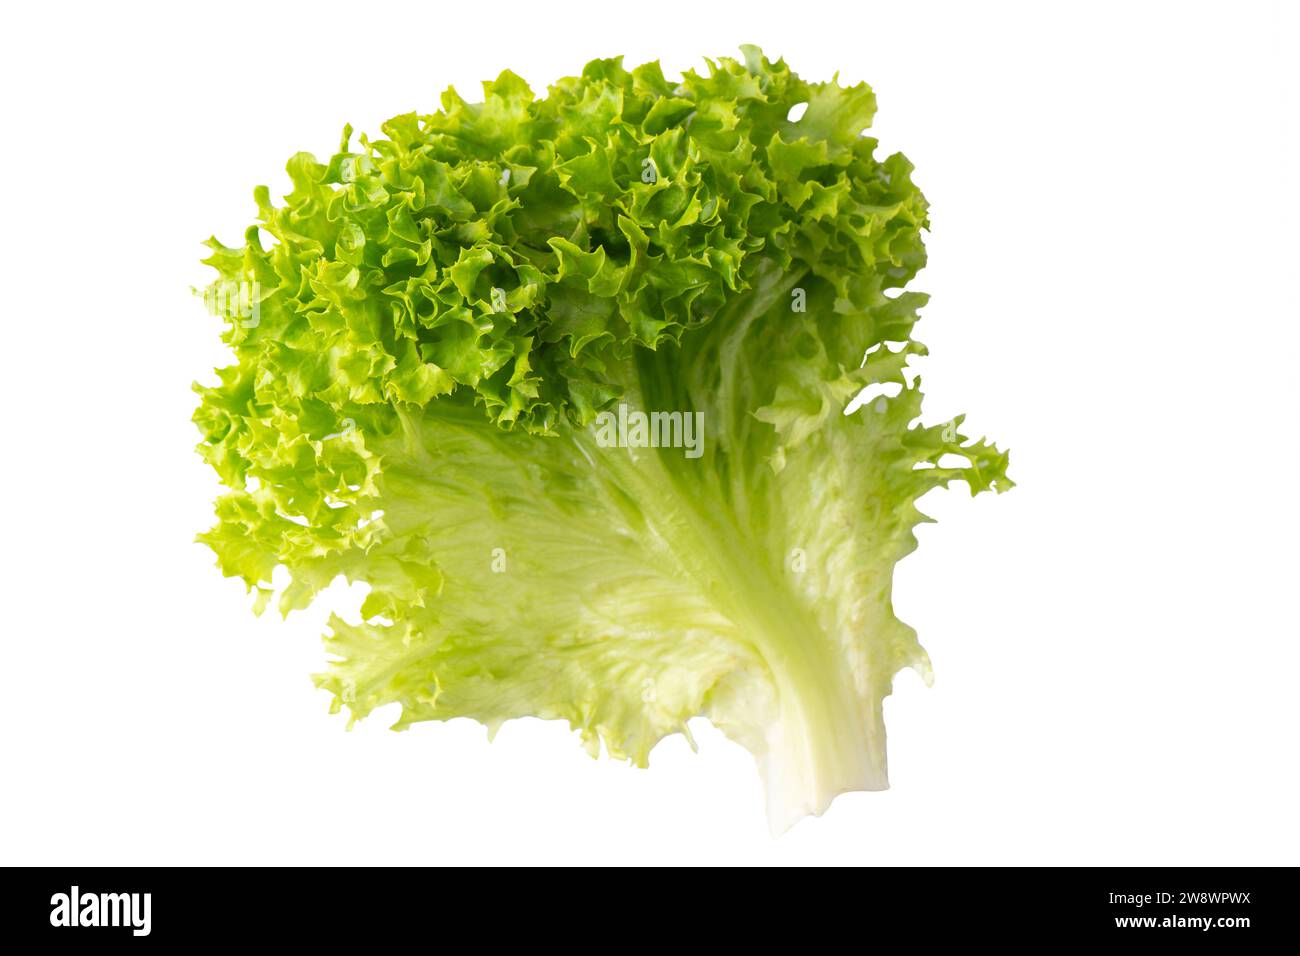 Lettuce organic salad, fresh green hydroponic vegetable isolated on white background. Salad leaf close up. Vegetarian food, healthy lifestyle Stock Photo